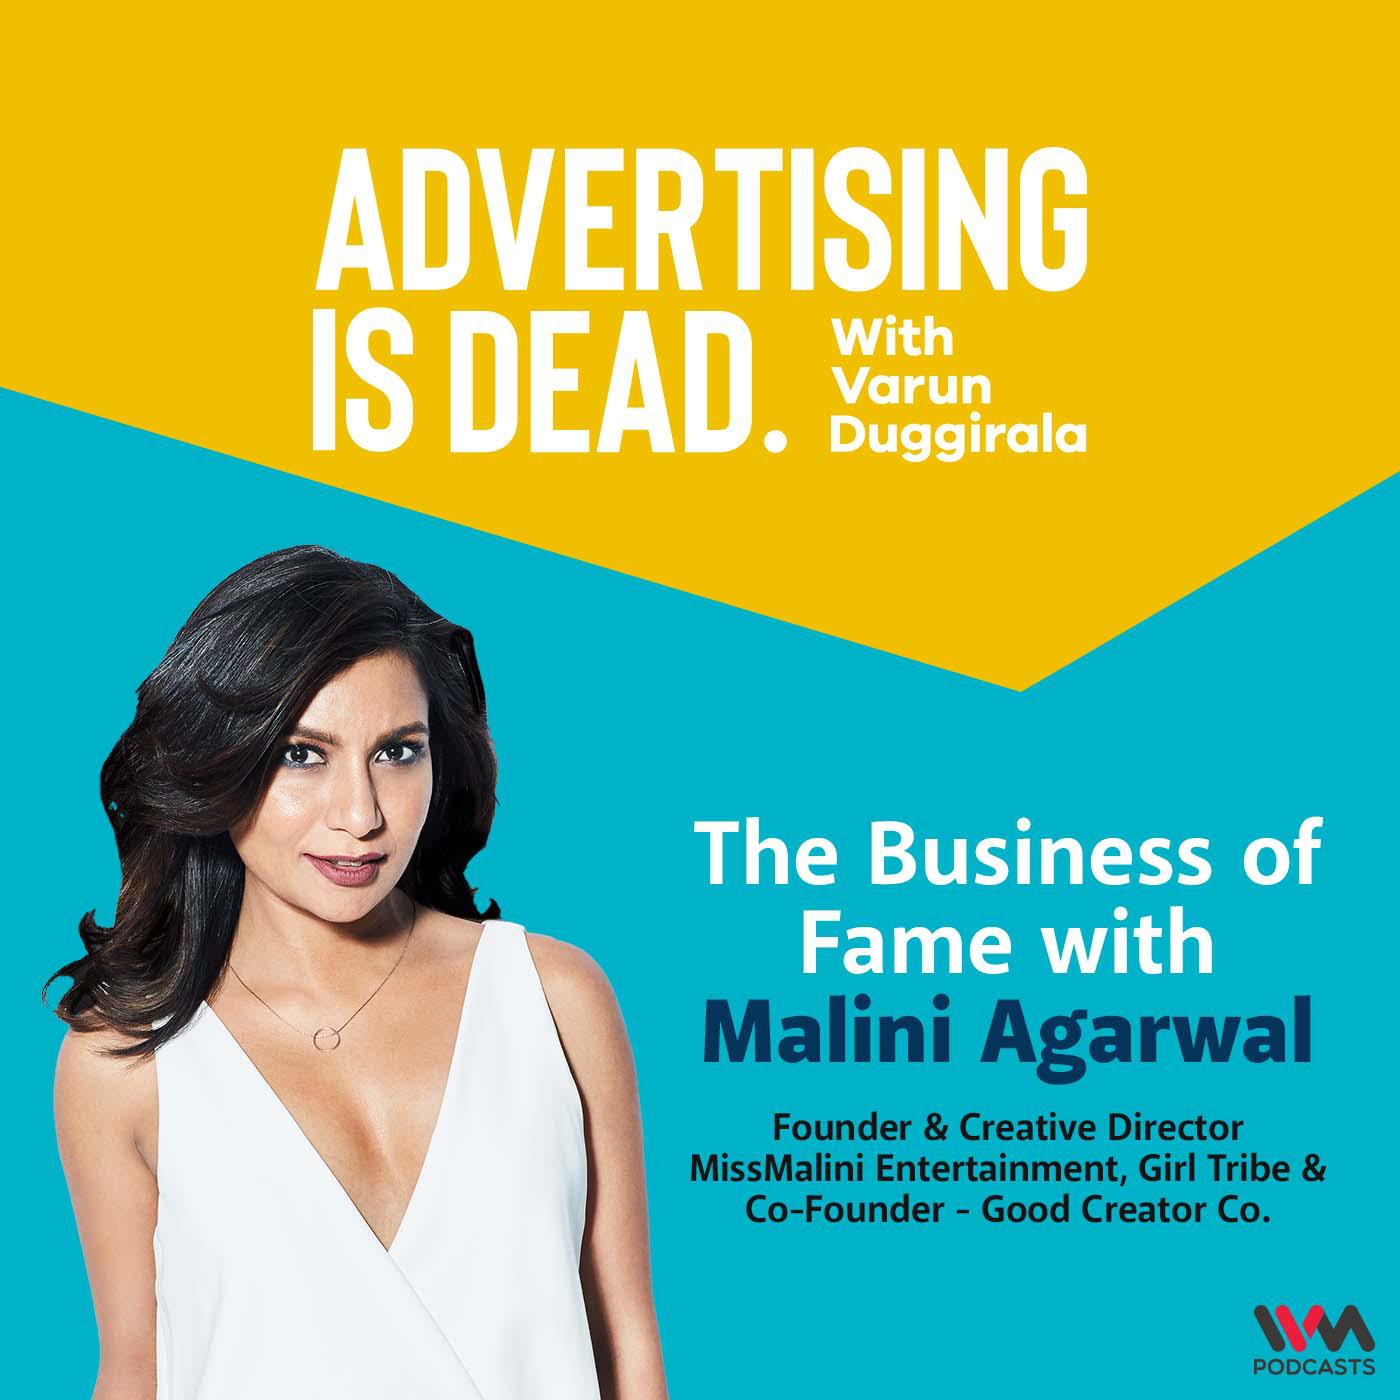 The Business of Fame with Malini Agarwal